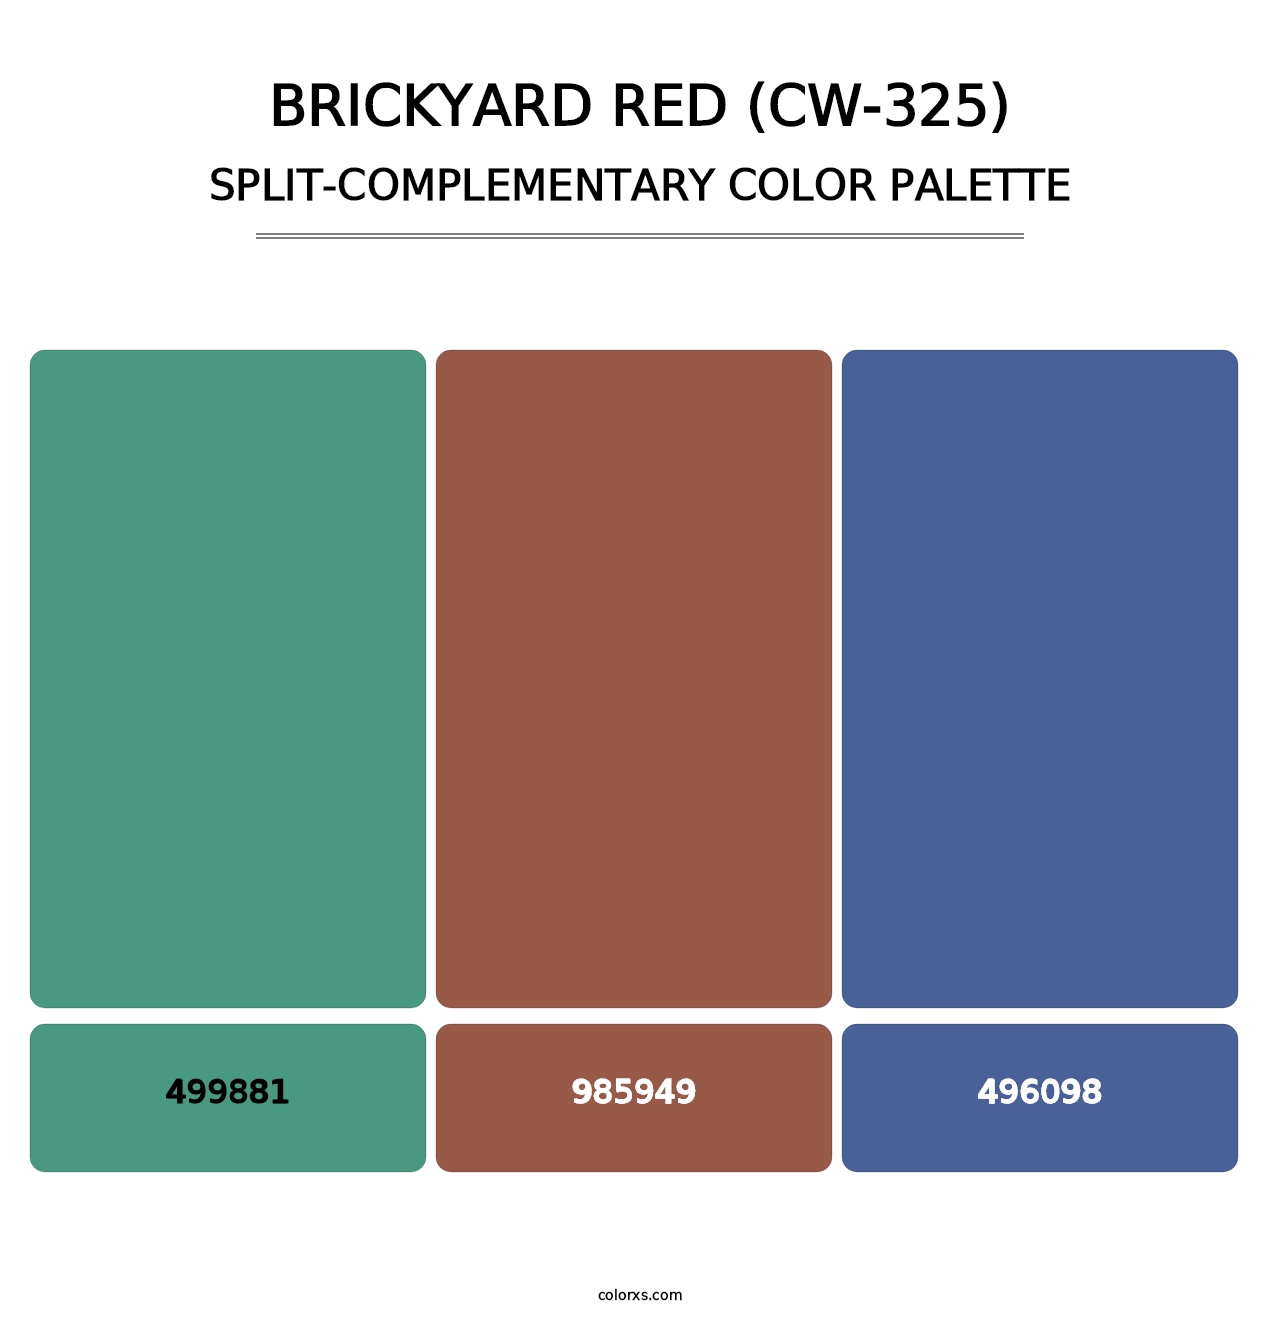 Brickyard Red (CW-325) - Split-Complementary Color Palette